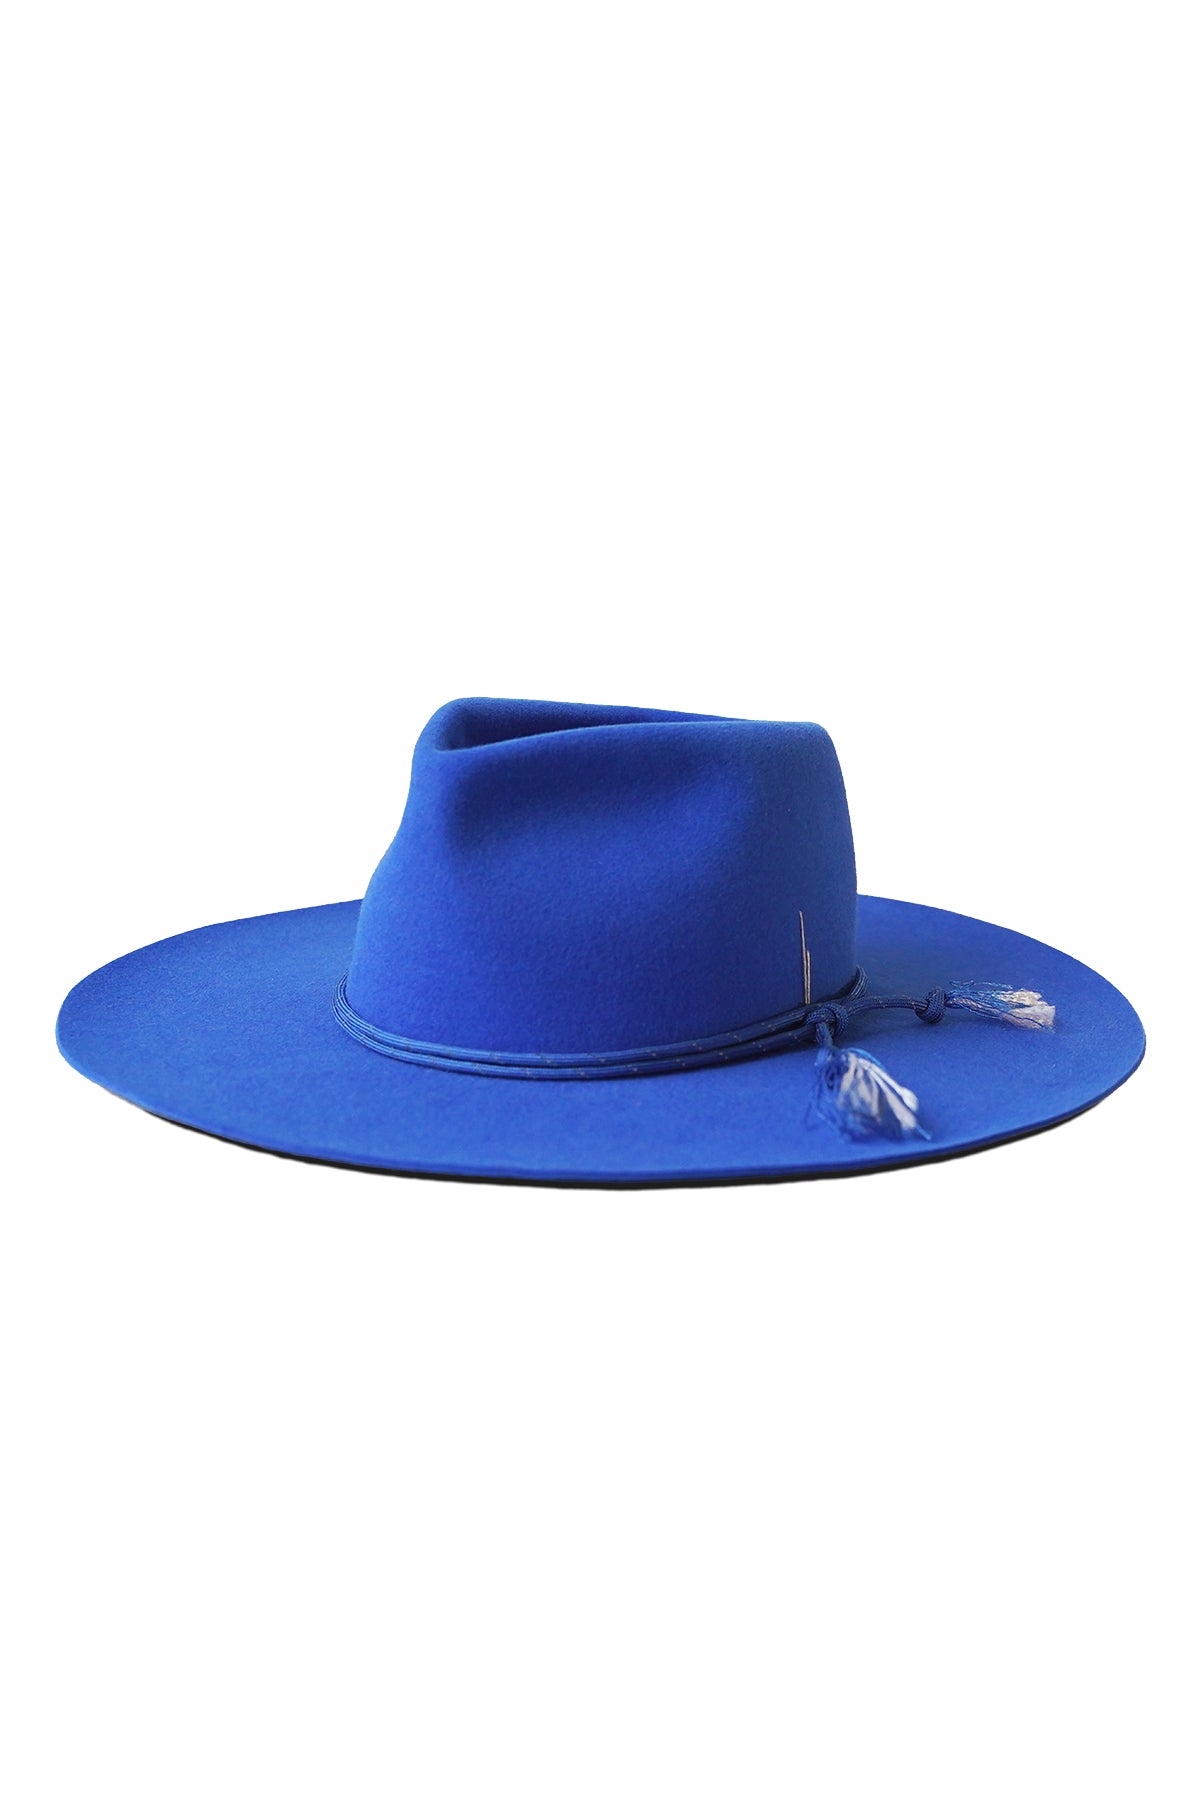 Blue fur felt fedora hat with a wide brim and paracord. Unisex hat style in various sizes and colors. We ship worldwide. Shop now. Each SoonNoon hat is handmade with unique character in Stockholm, Sweden.